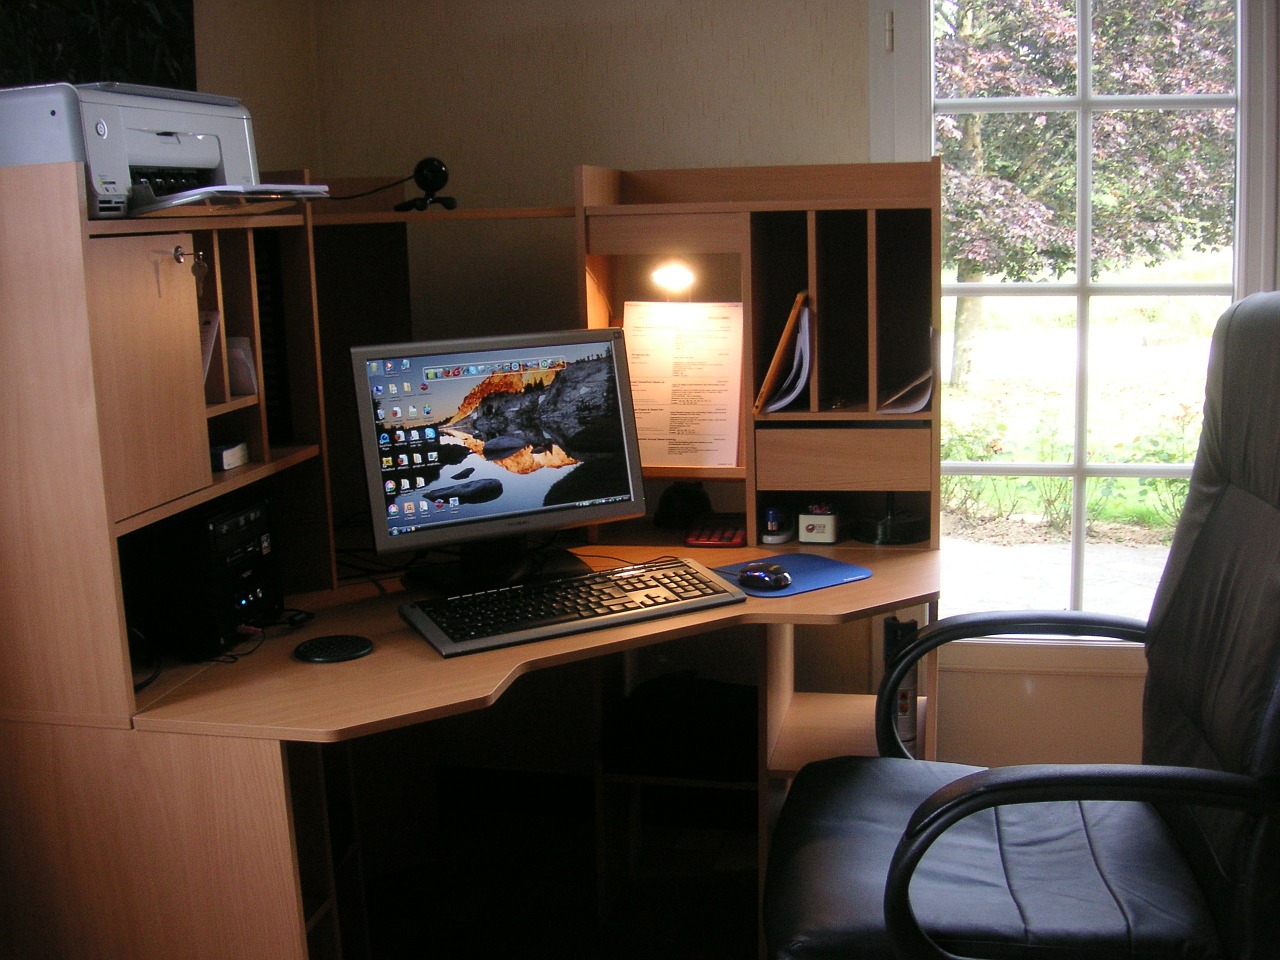 A clean and clutter free work environment will help you work from home more effectively